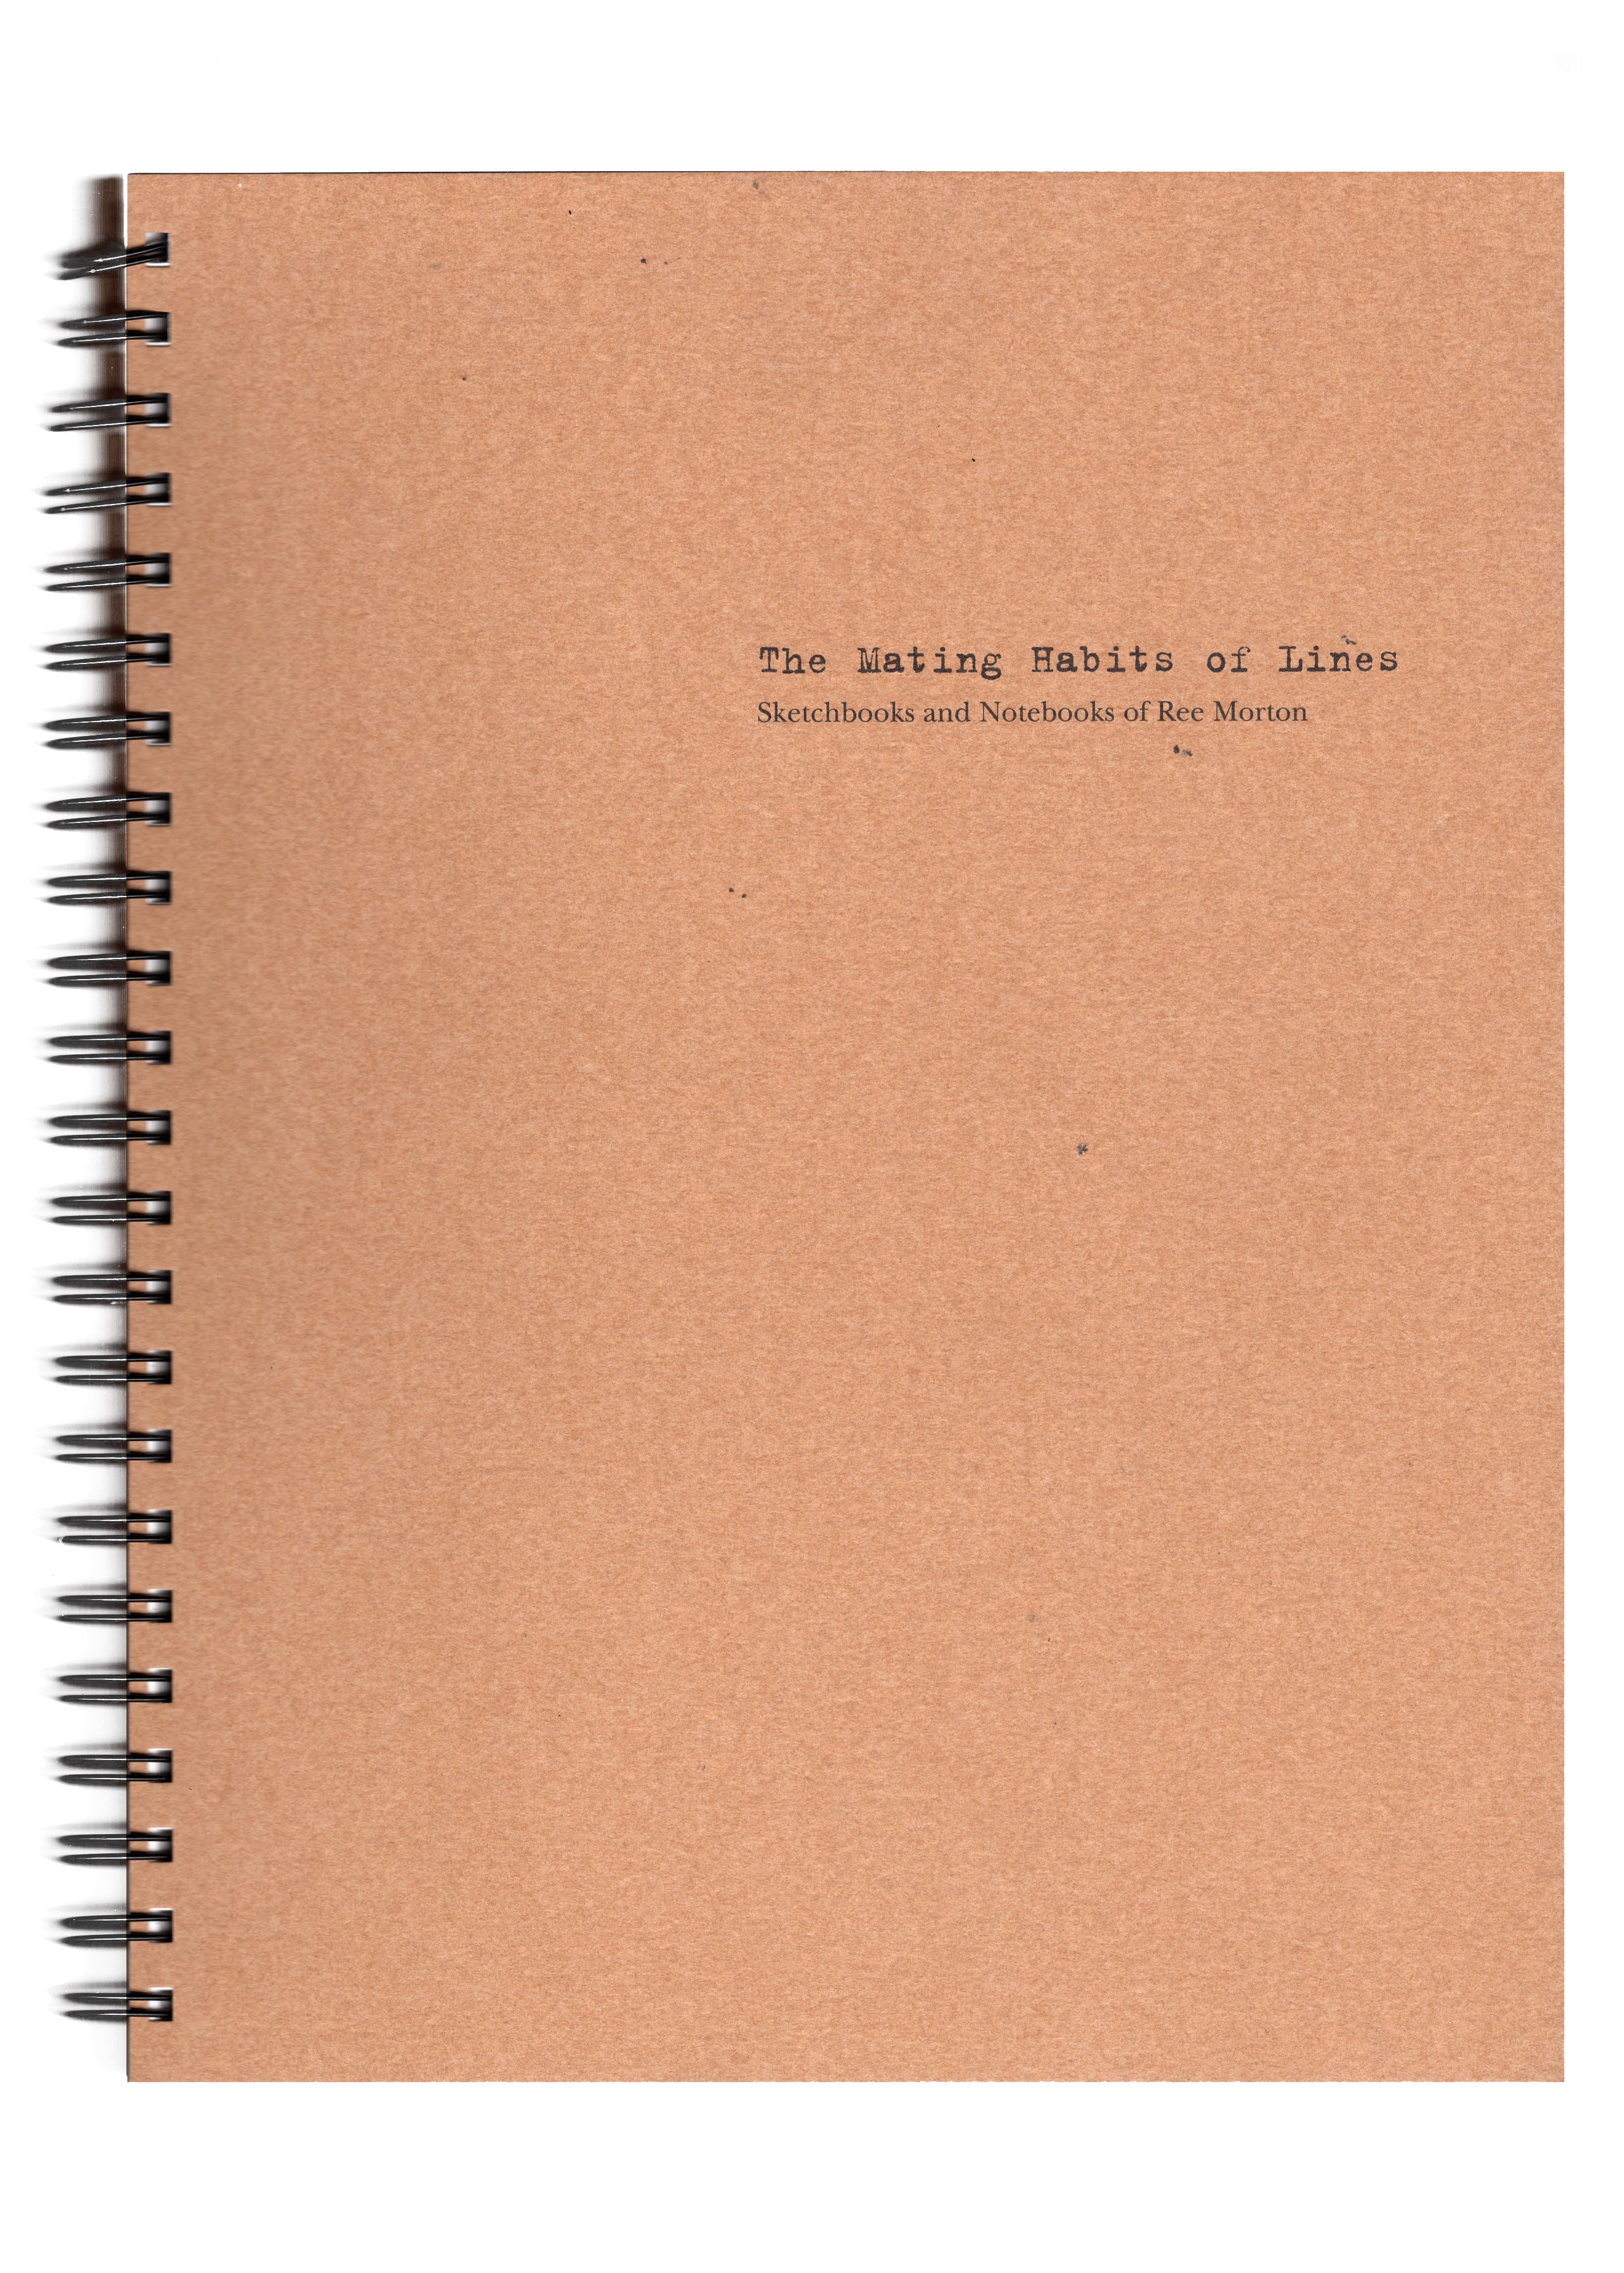 The Mating Habits of Lines: Sketchbooks and Notebooks of Ree Morton [Book]